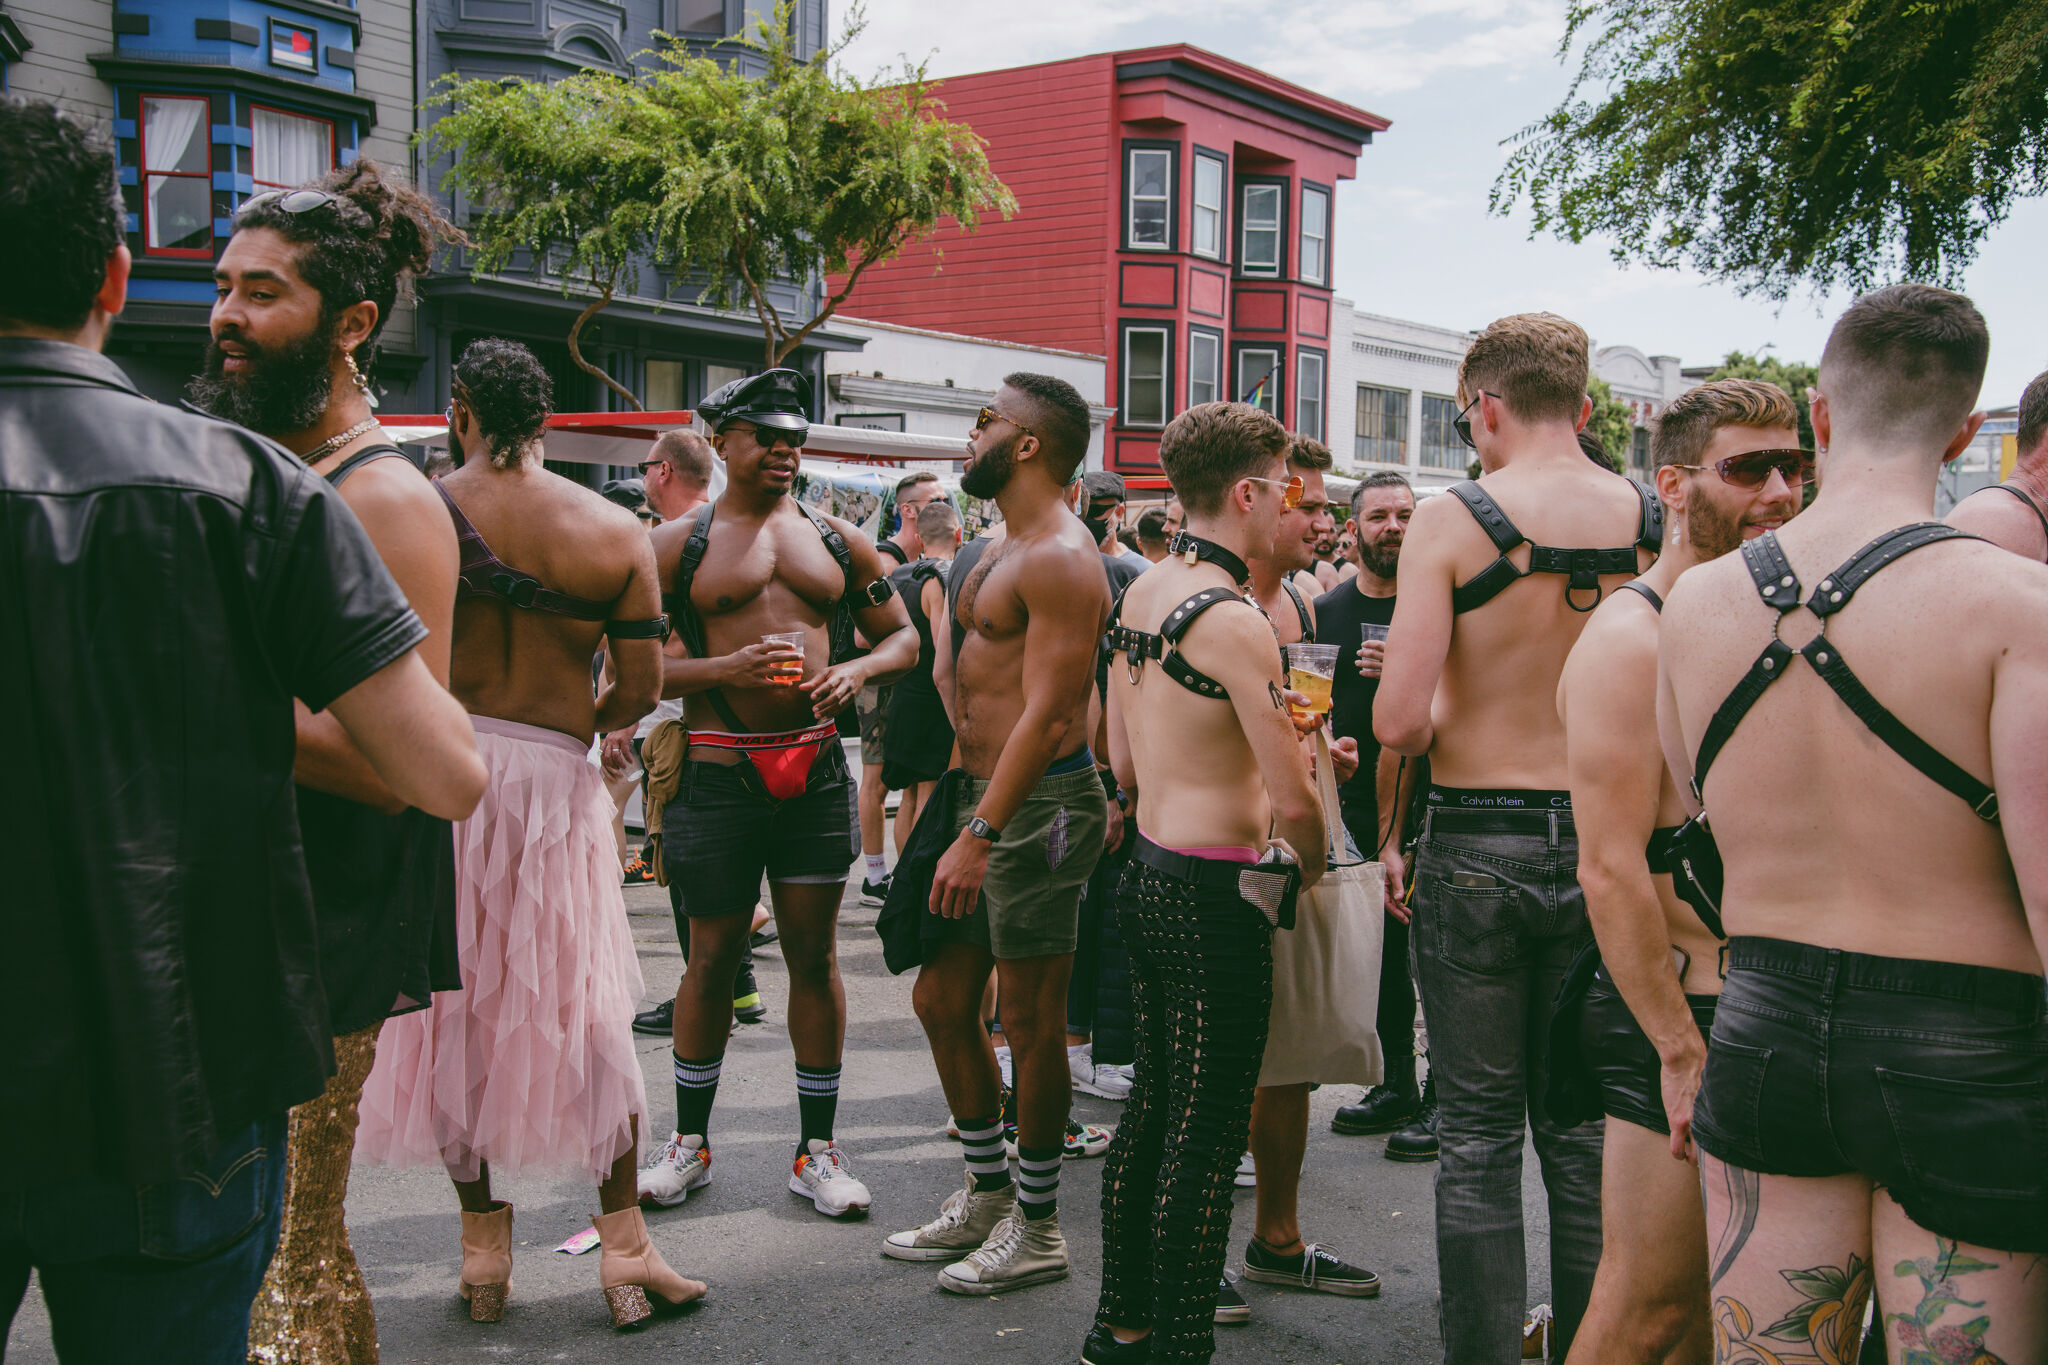 San Francisco's Dore Alley returns this weekend TrendRadars